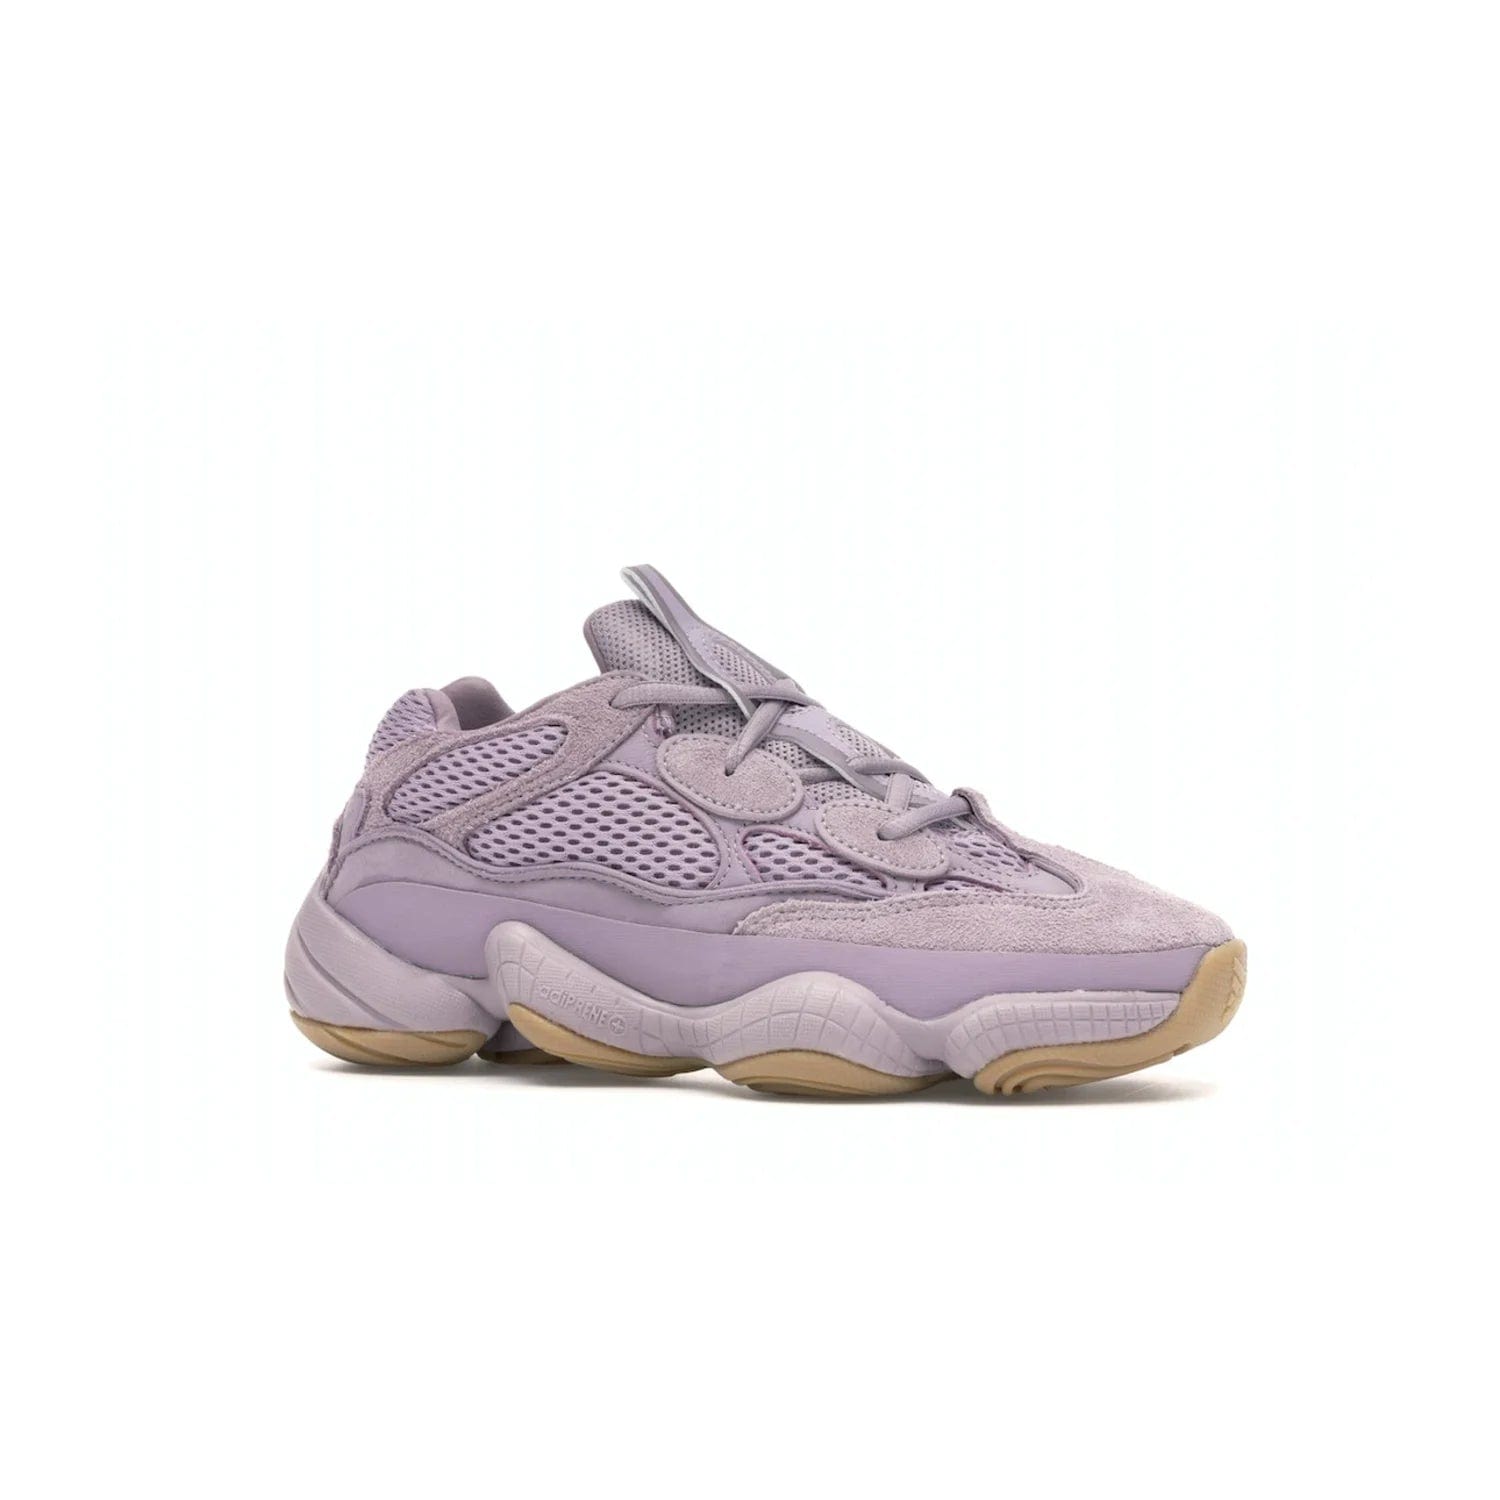 adidas Yeezy 500 Soft Vision - Image 3 - Only at www.BallersClubKickz.com - New adidas Yeezy 500 Soft Vision sneaker featuring a combination of mesh, leather, and suede in a classic Soft Vision colorway. Gum rubber outsole ensures durability and traction. An everyday sneaker that stands out from the crowd.